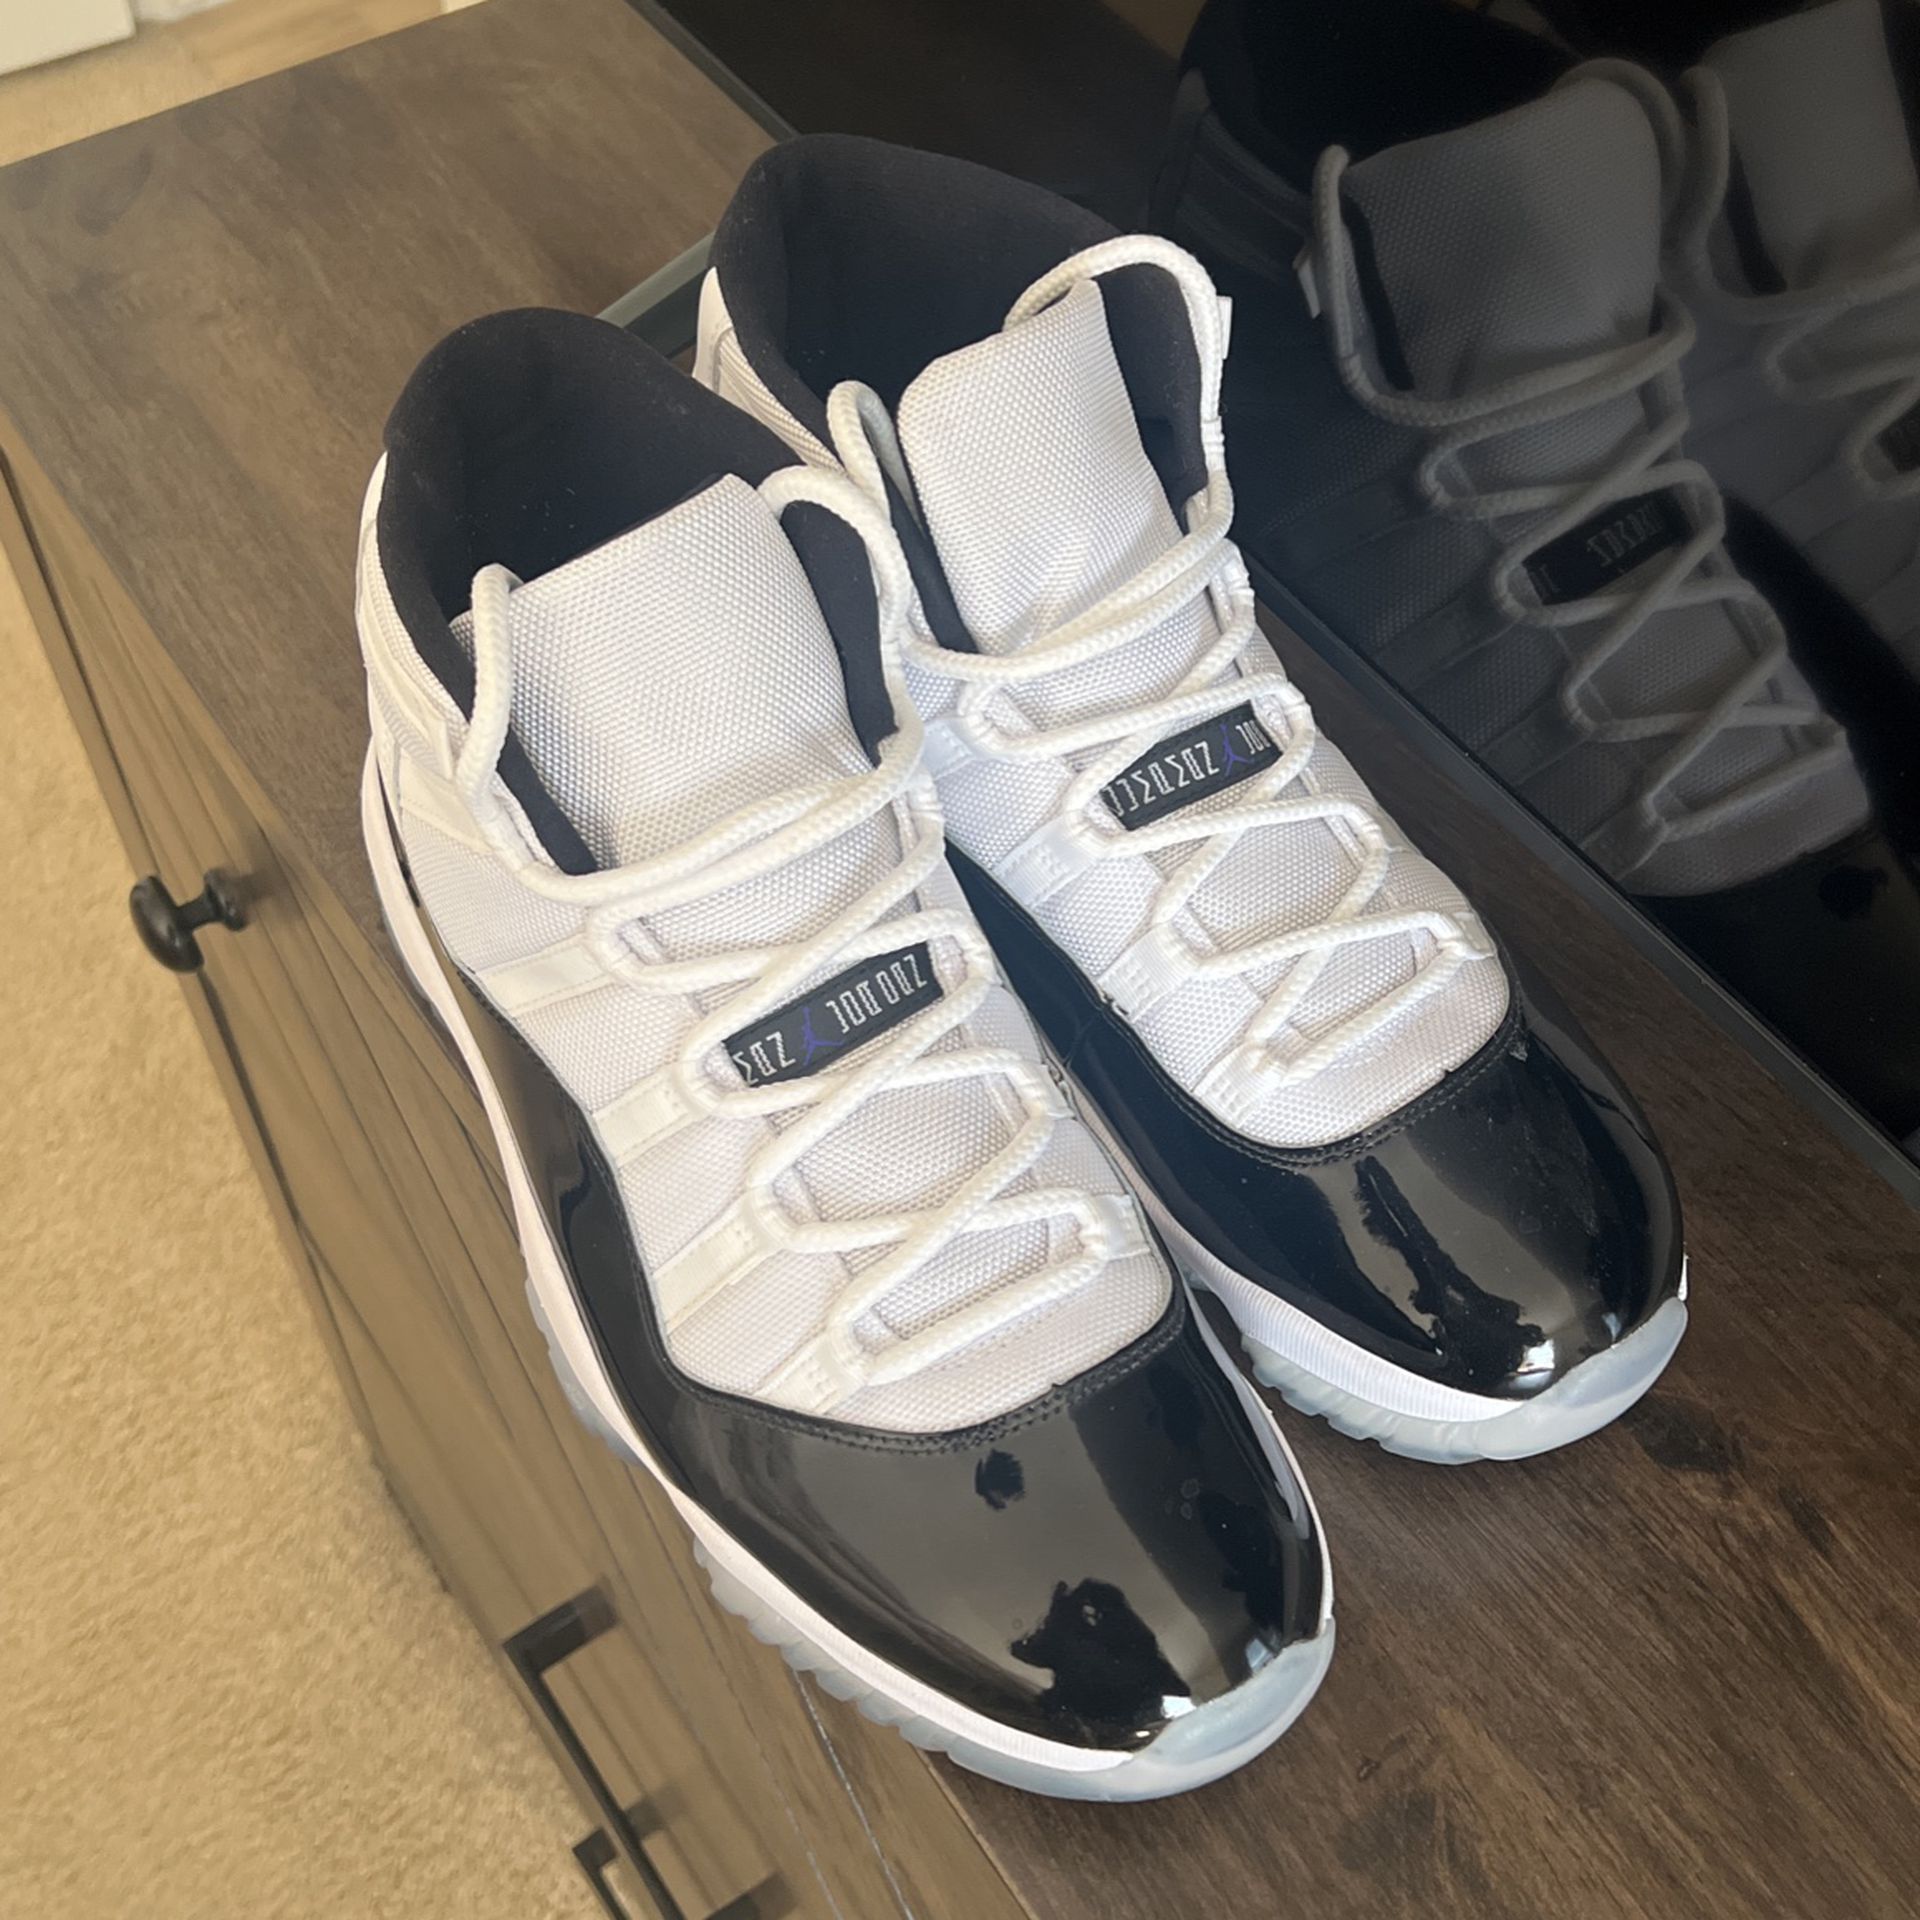 Alaska Spektakulær Okklusion Jordan 11 Concord Clean and Barely Worn Cheaper than Stockx by $130 for  Sale in Santa Ana, CA - OfferUp